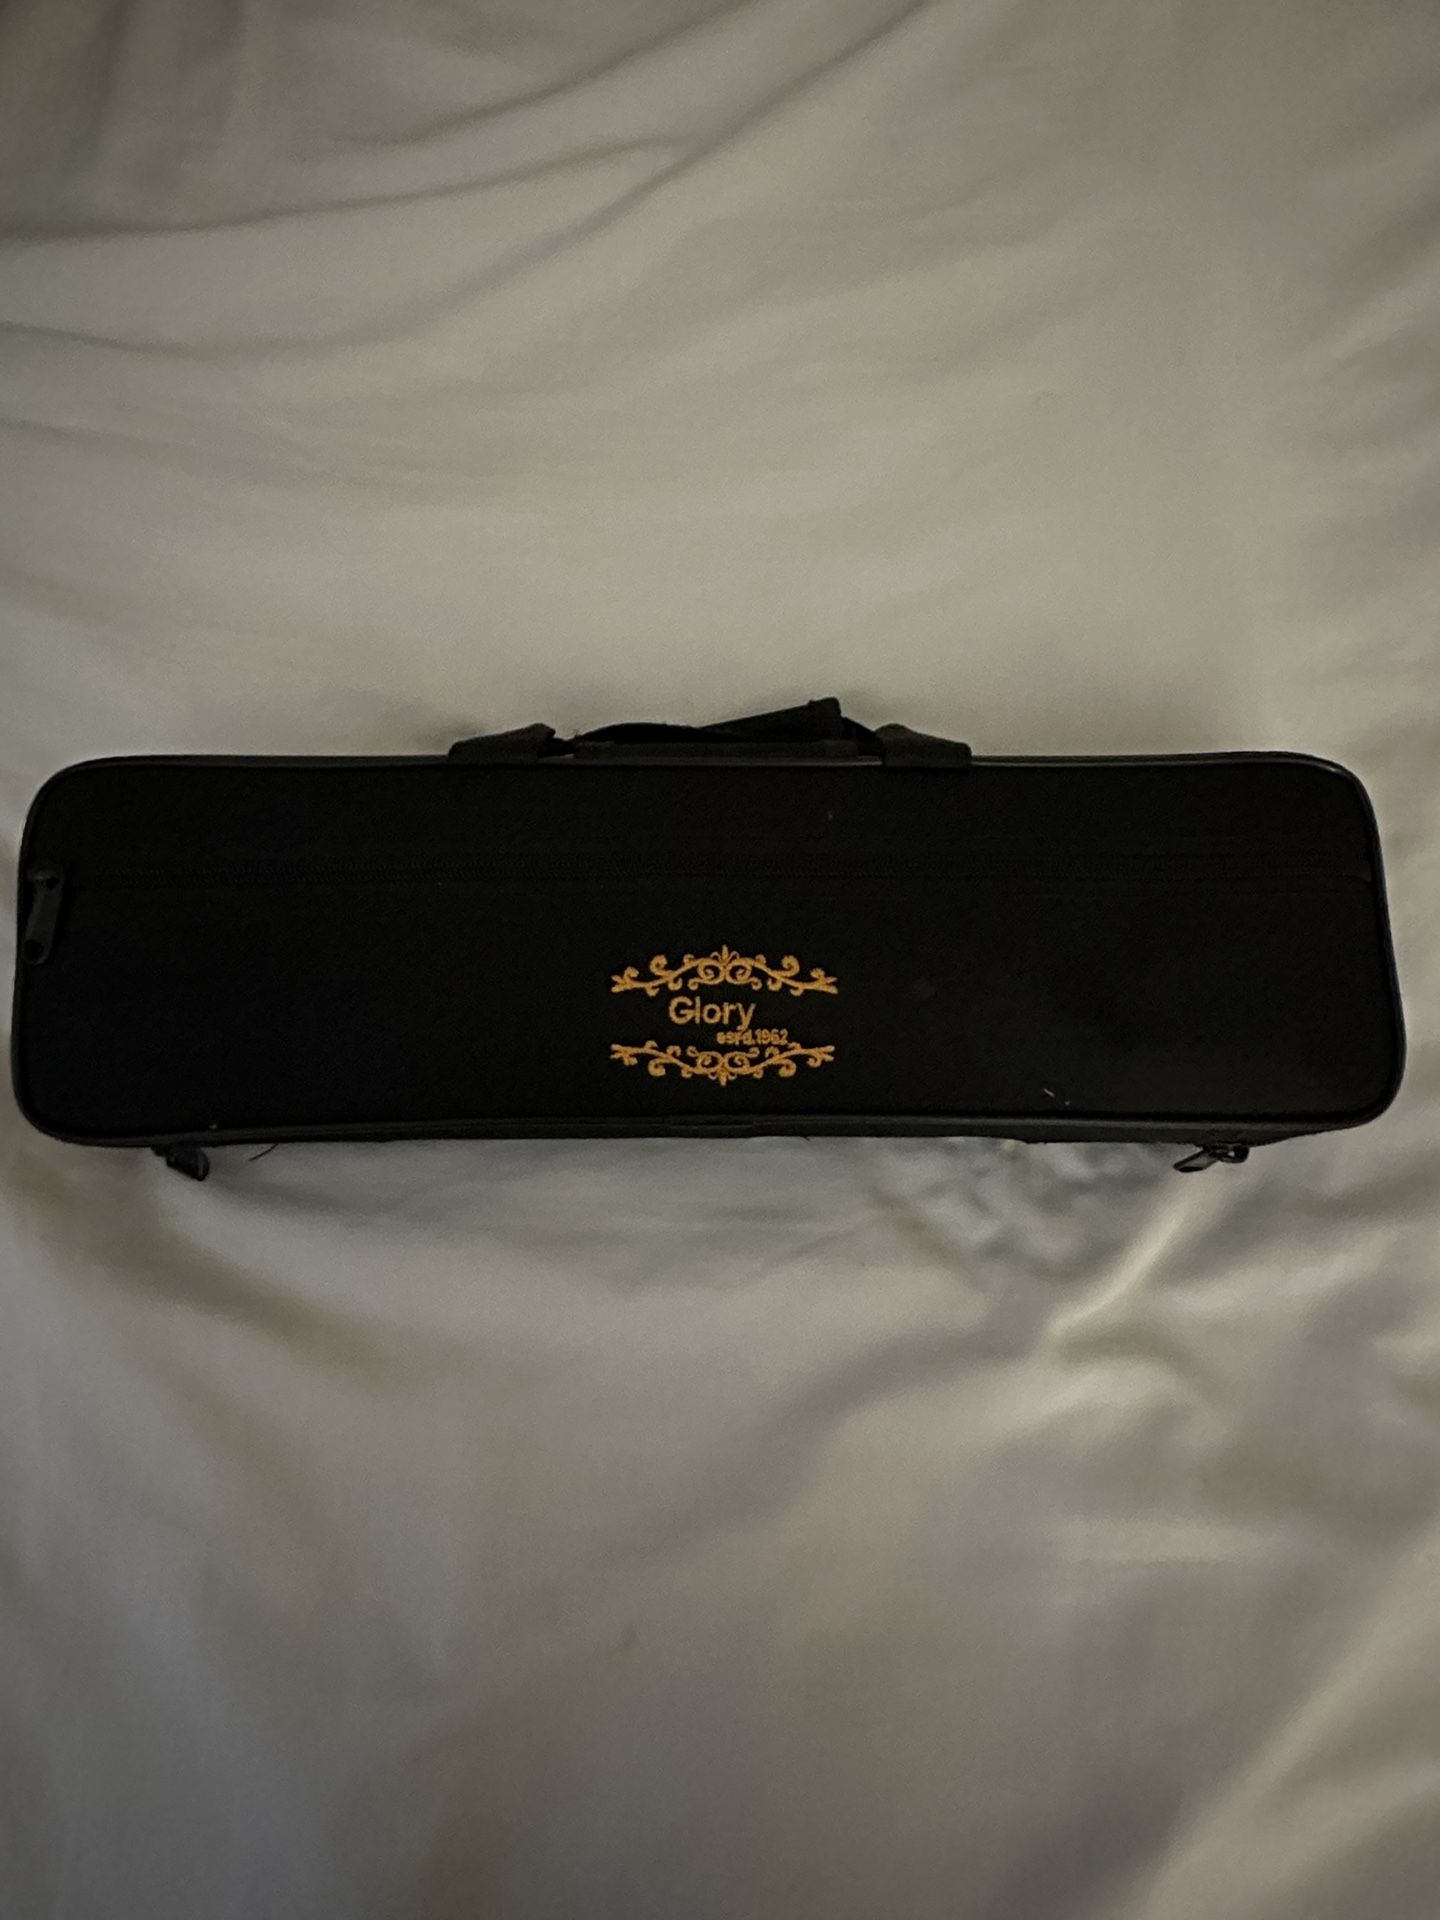 Glory Closed Hole C Flute With Case (Tuning Rod , Joint Grease, and Cloth)